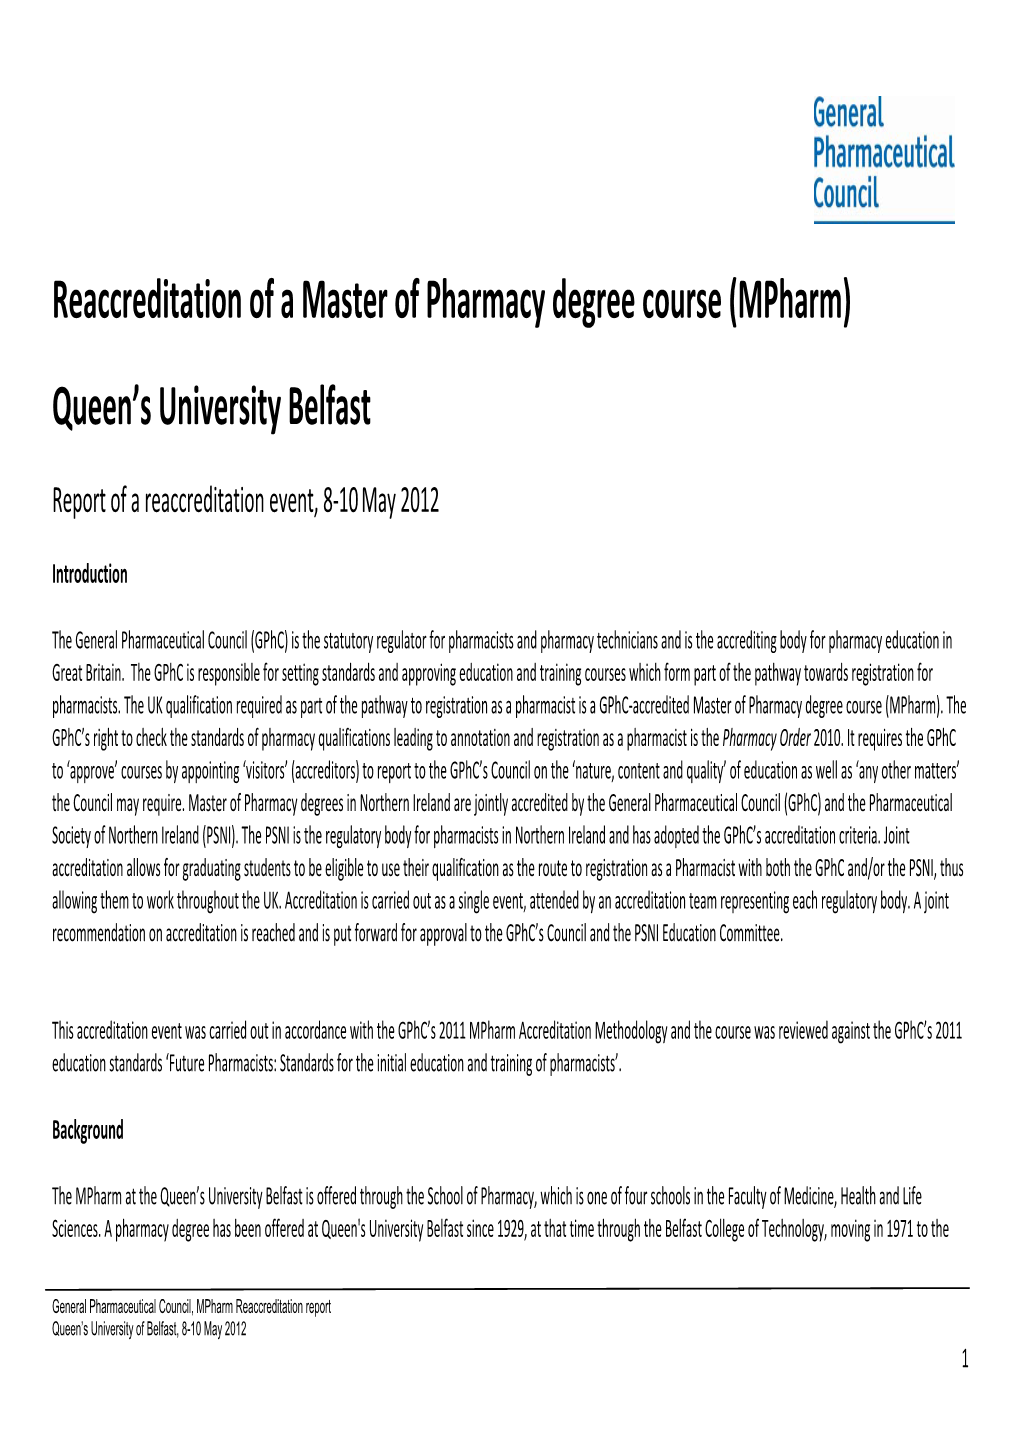 Reaccreditation of a Master of Pharmacy Degree Course (Mpharm)